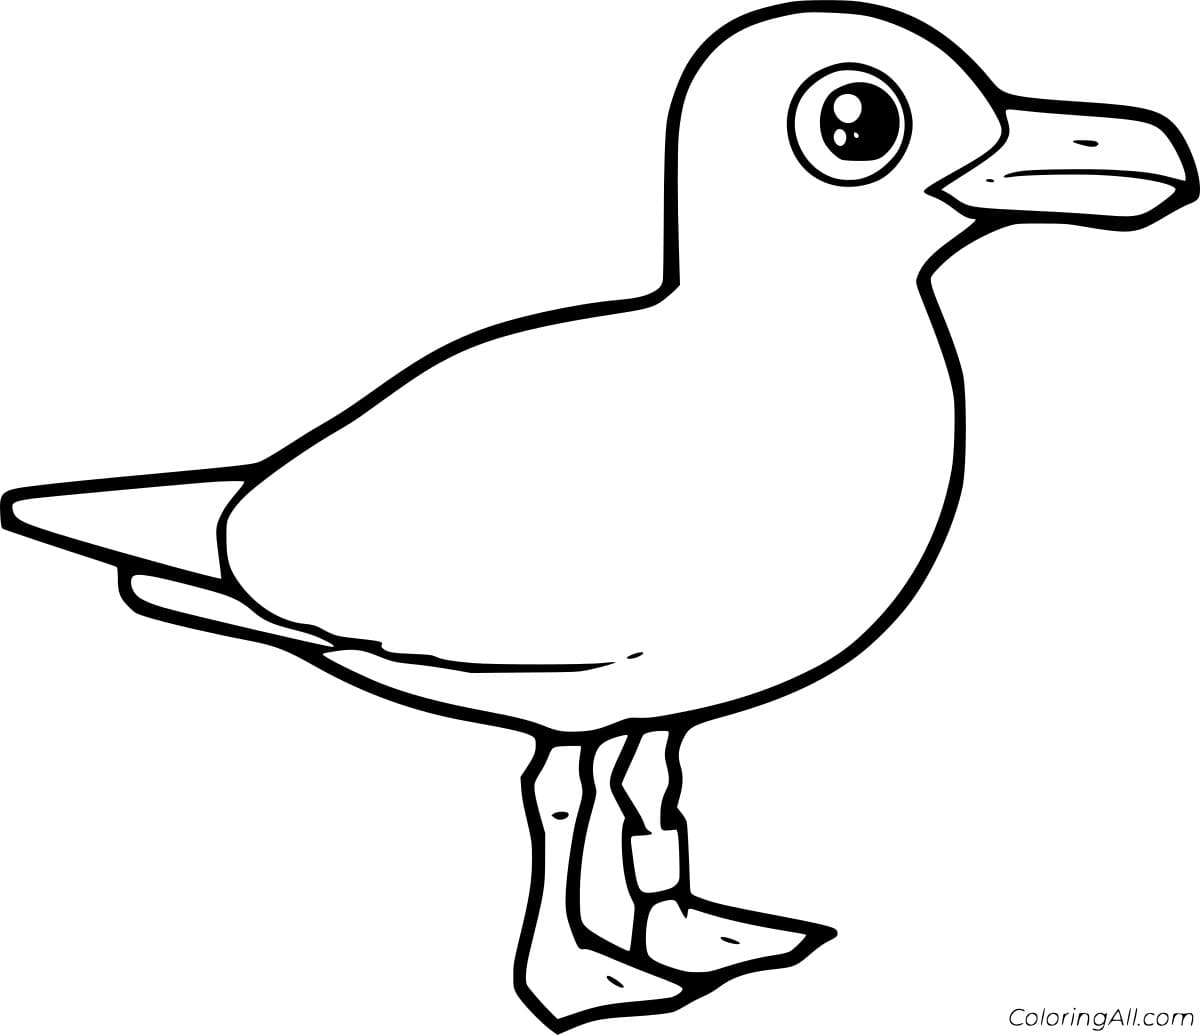 Easy Cartoon Seagull Coloring Page